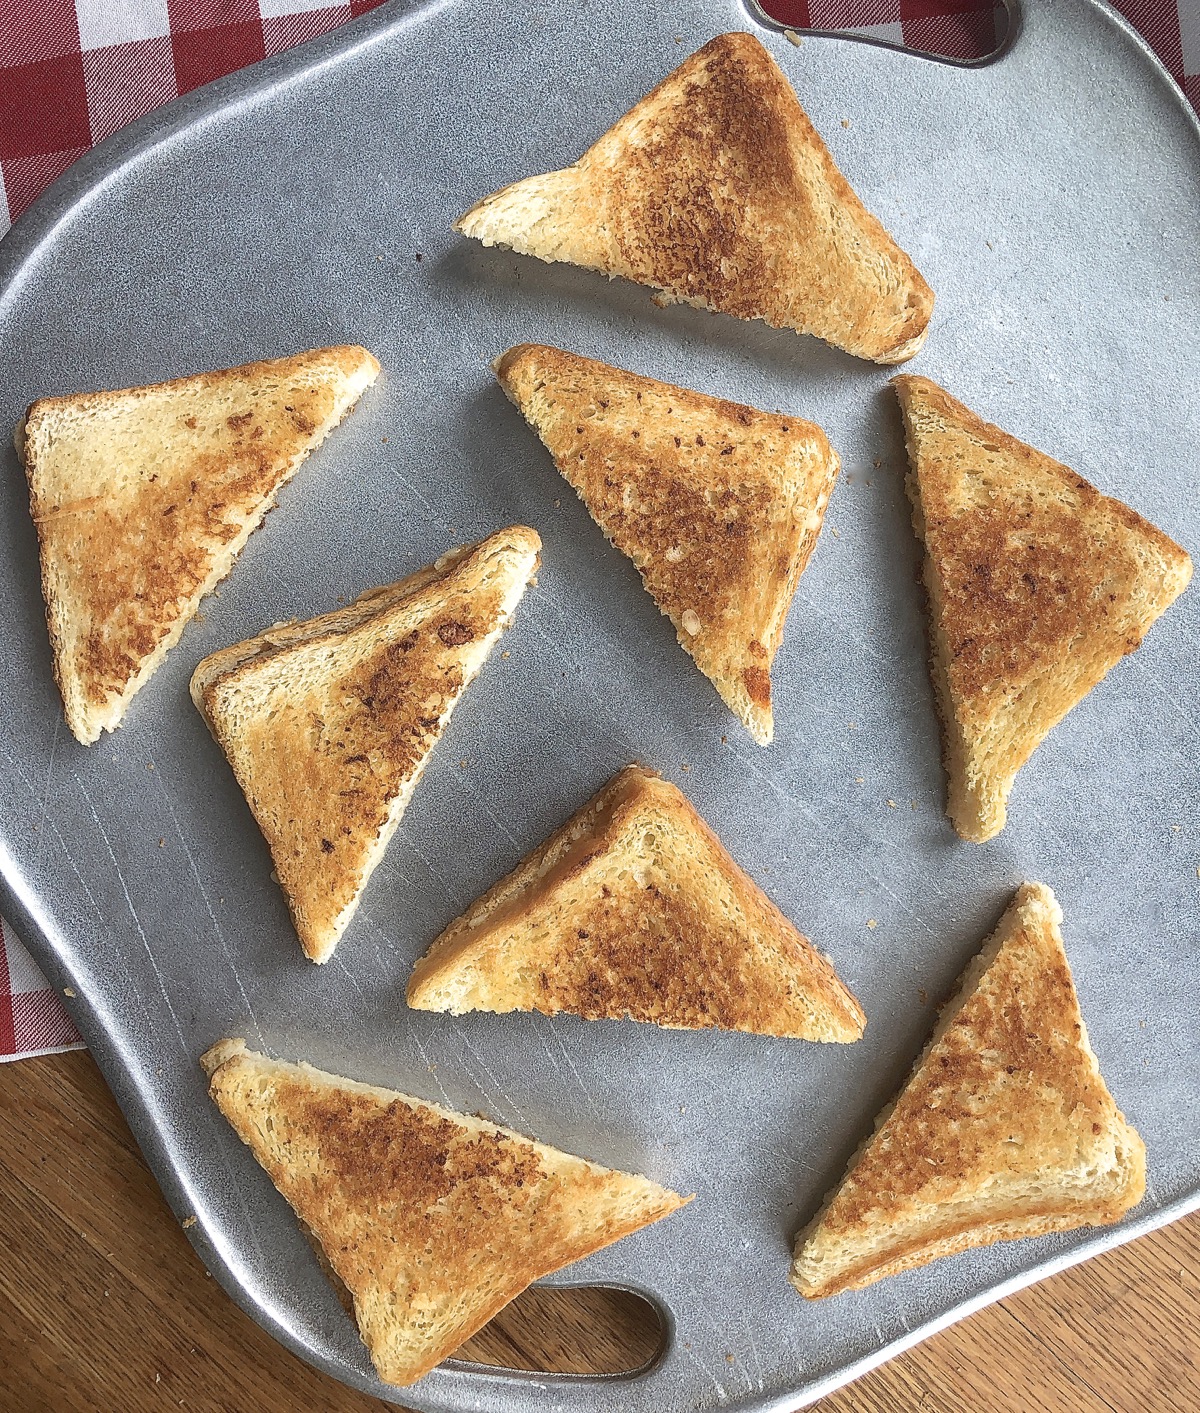 Grilled cheese sandwiches cut in triangles, arranged on a serving plate